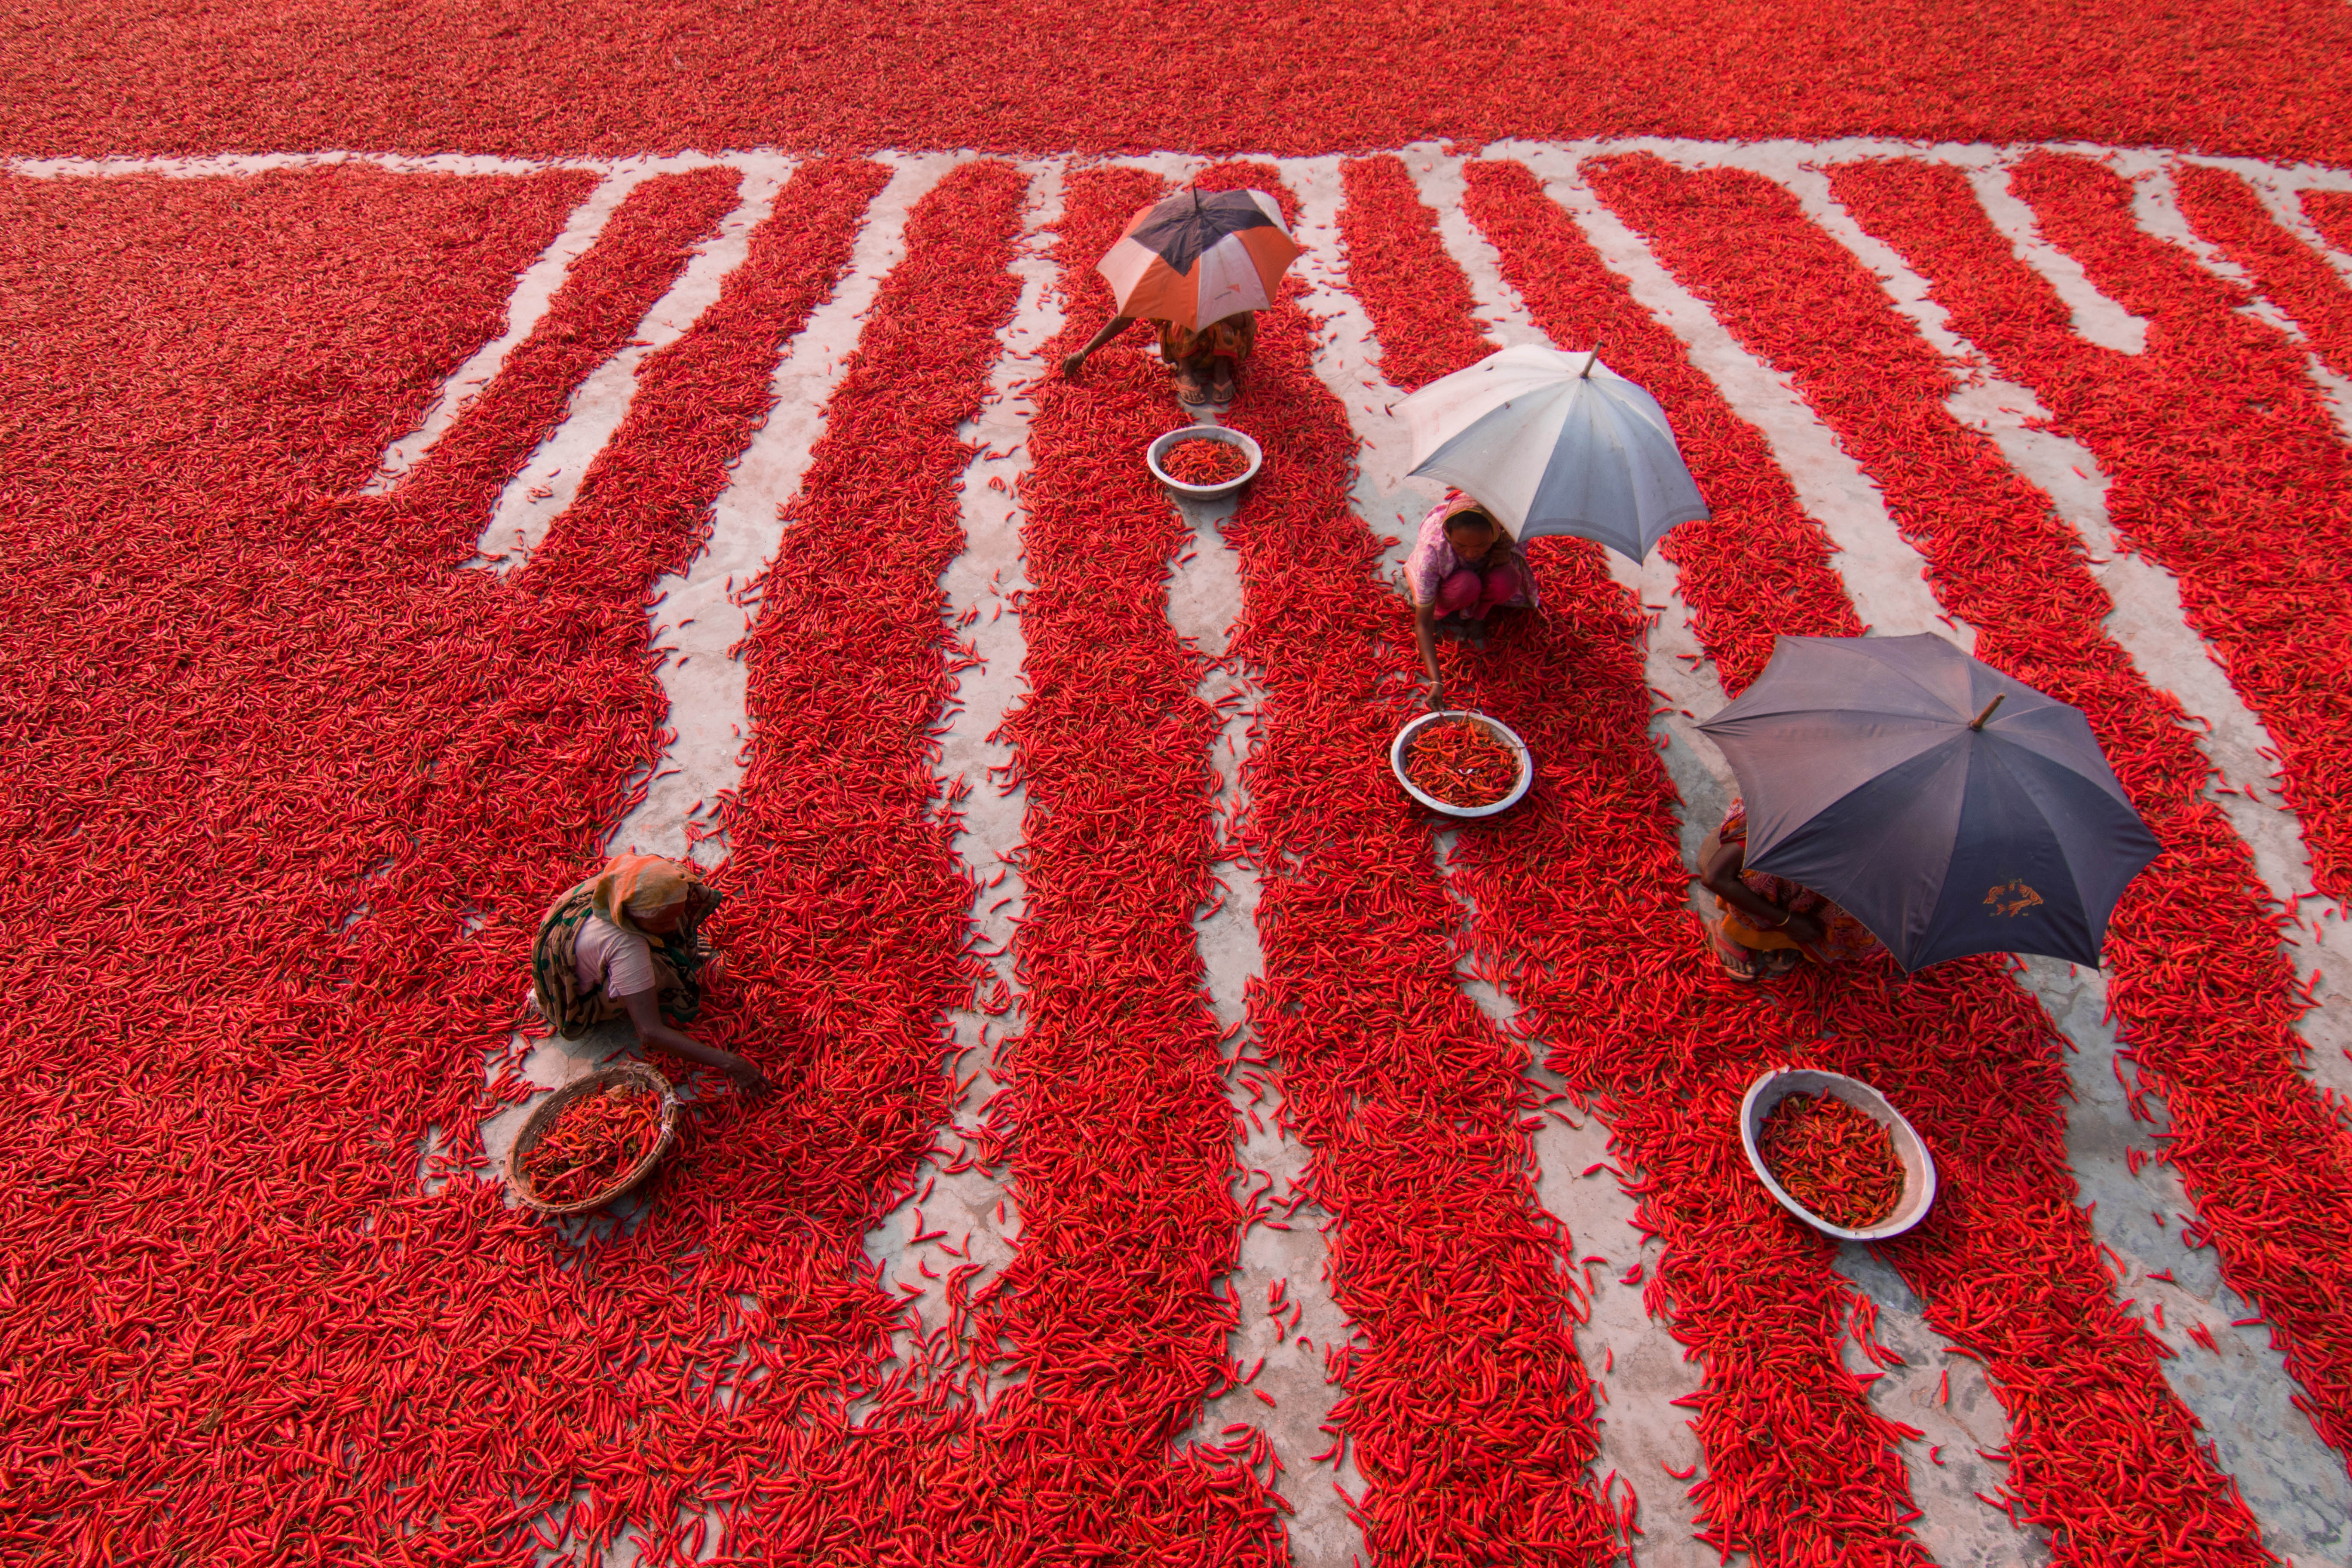 Red Chilies Pickers in Bangladesh